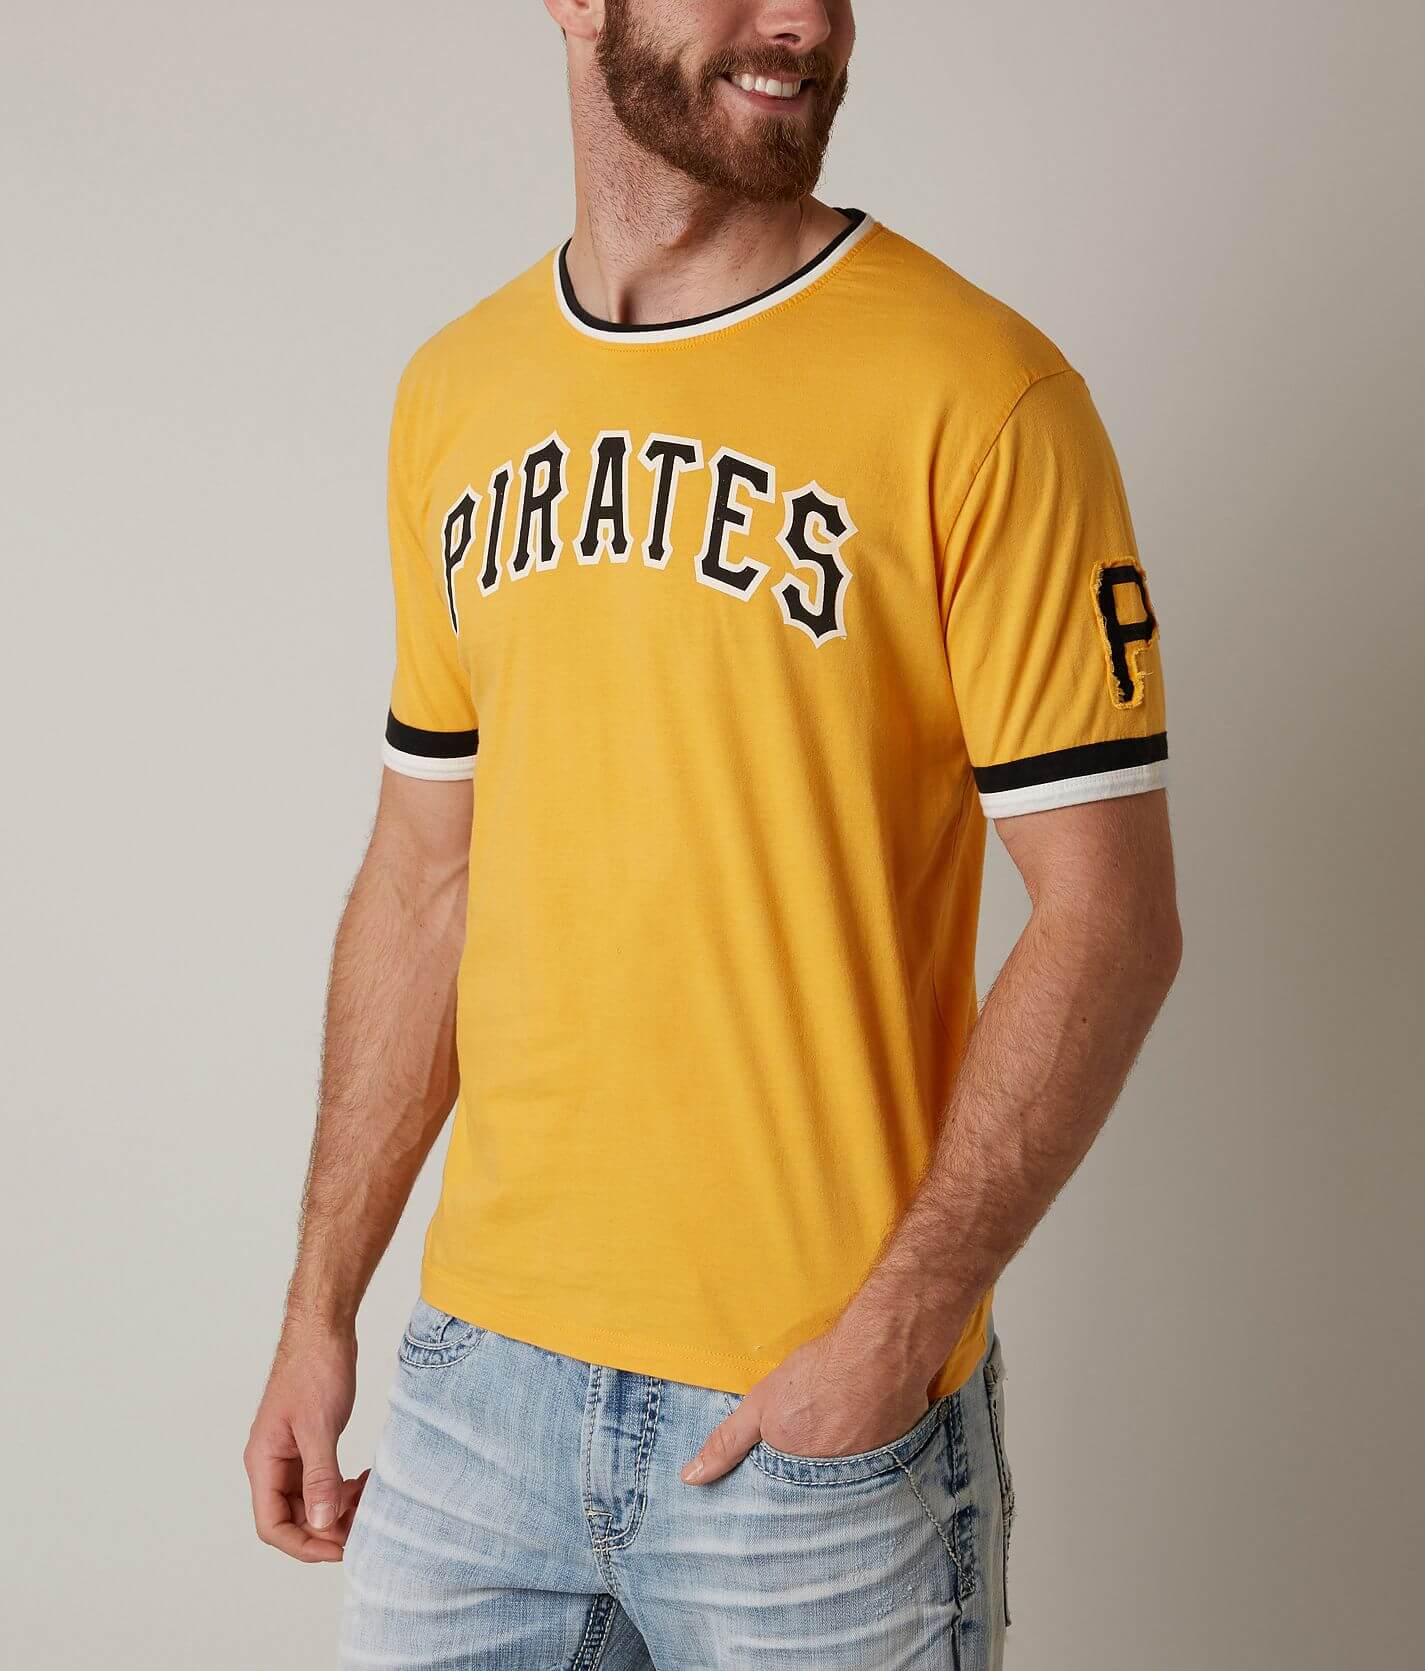 Red Jacket Pittsburgh Pirates T-Shirt - Men's T-Shirts in Gold